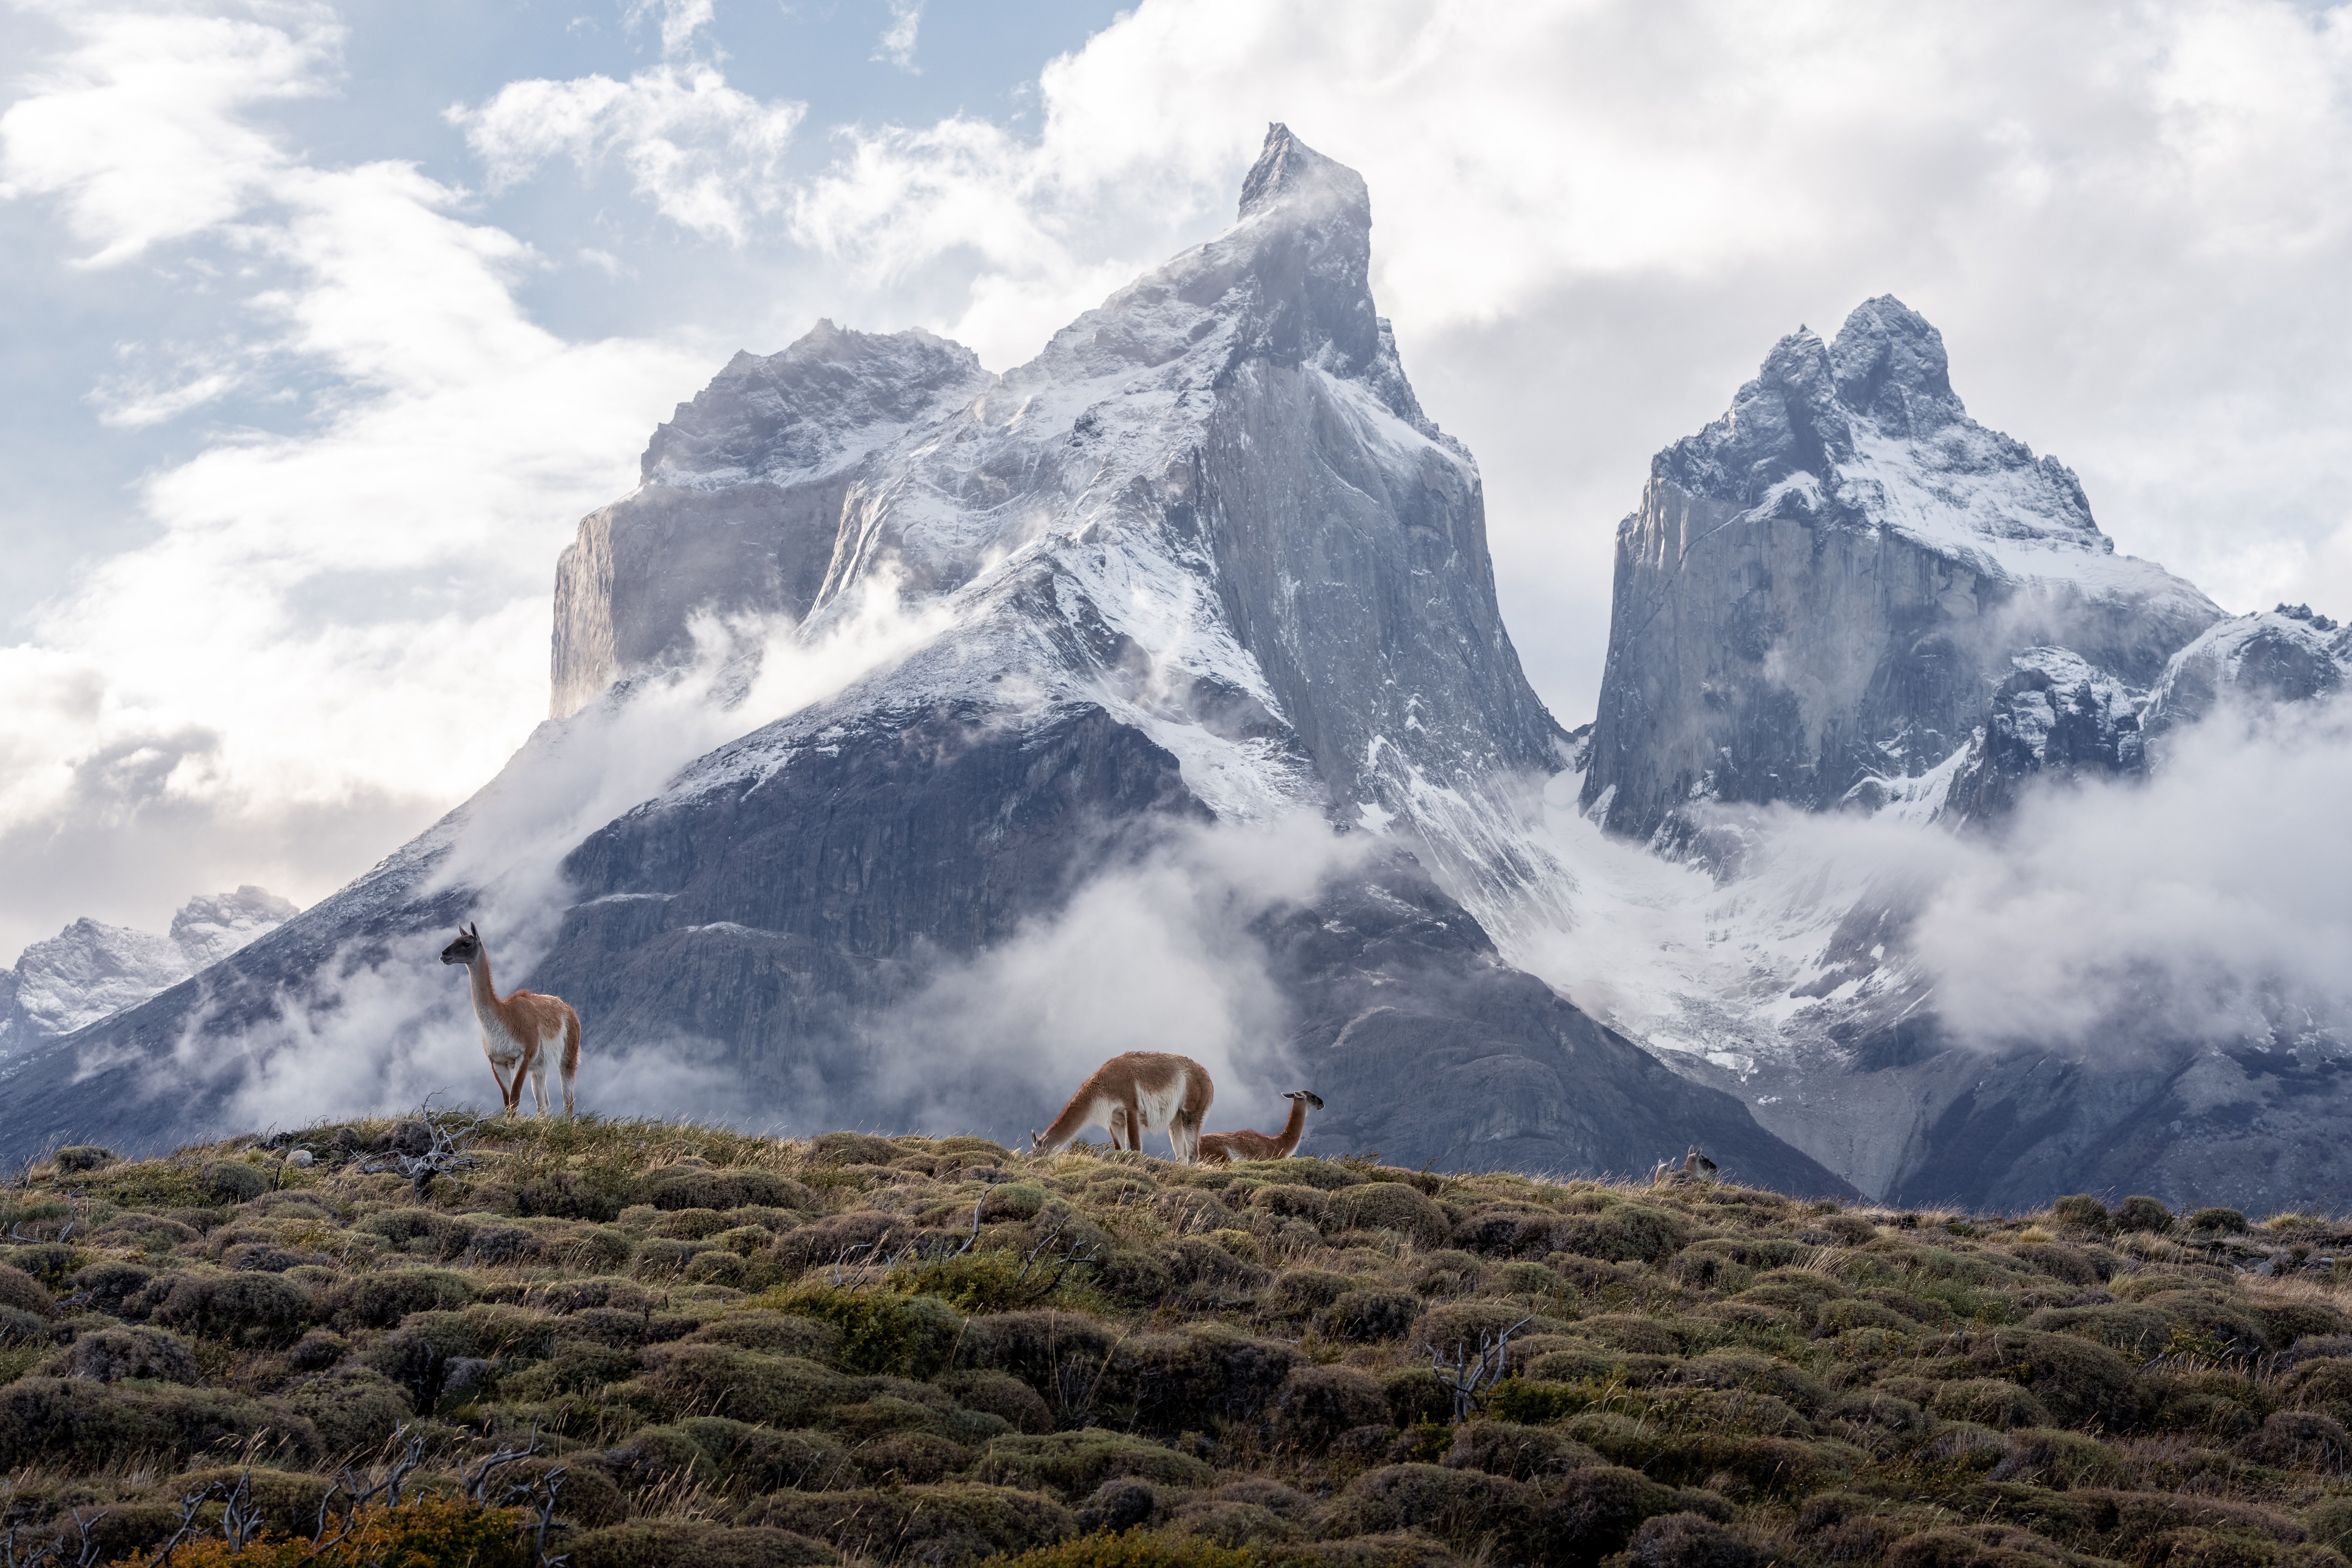 Two guanacos grazing in front of Los Cuernos in Torres del Paine National Park